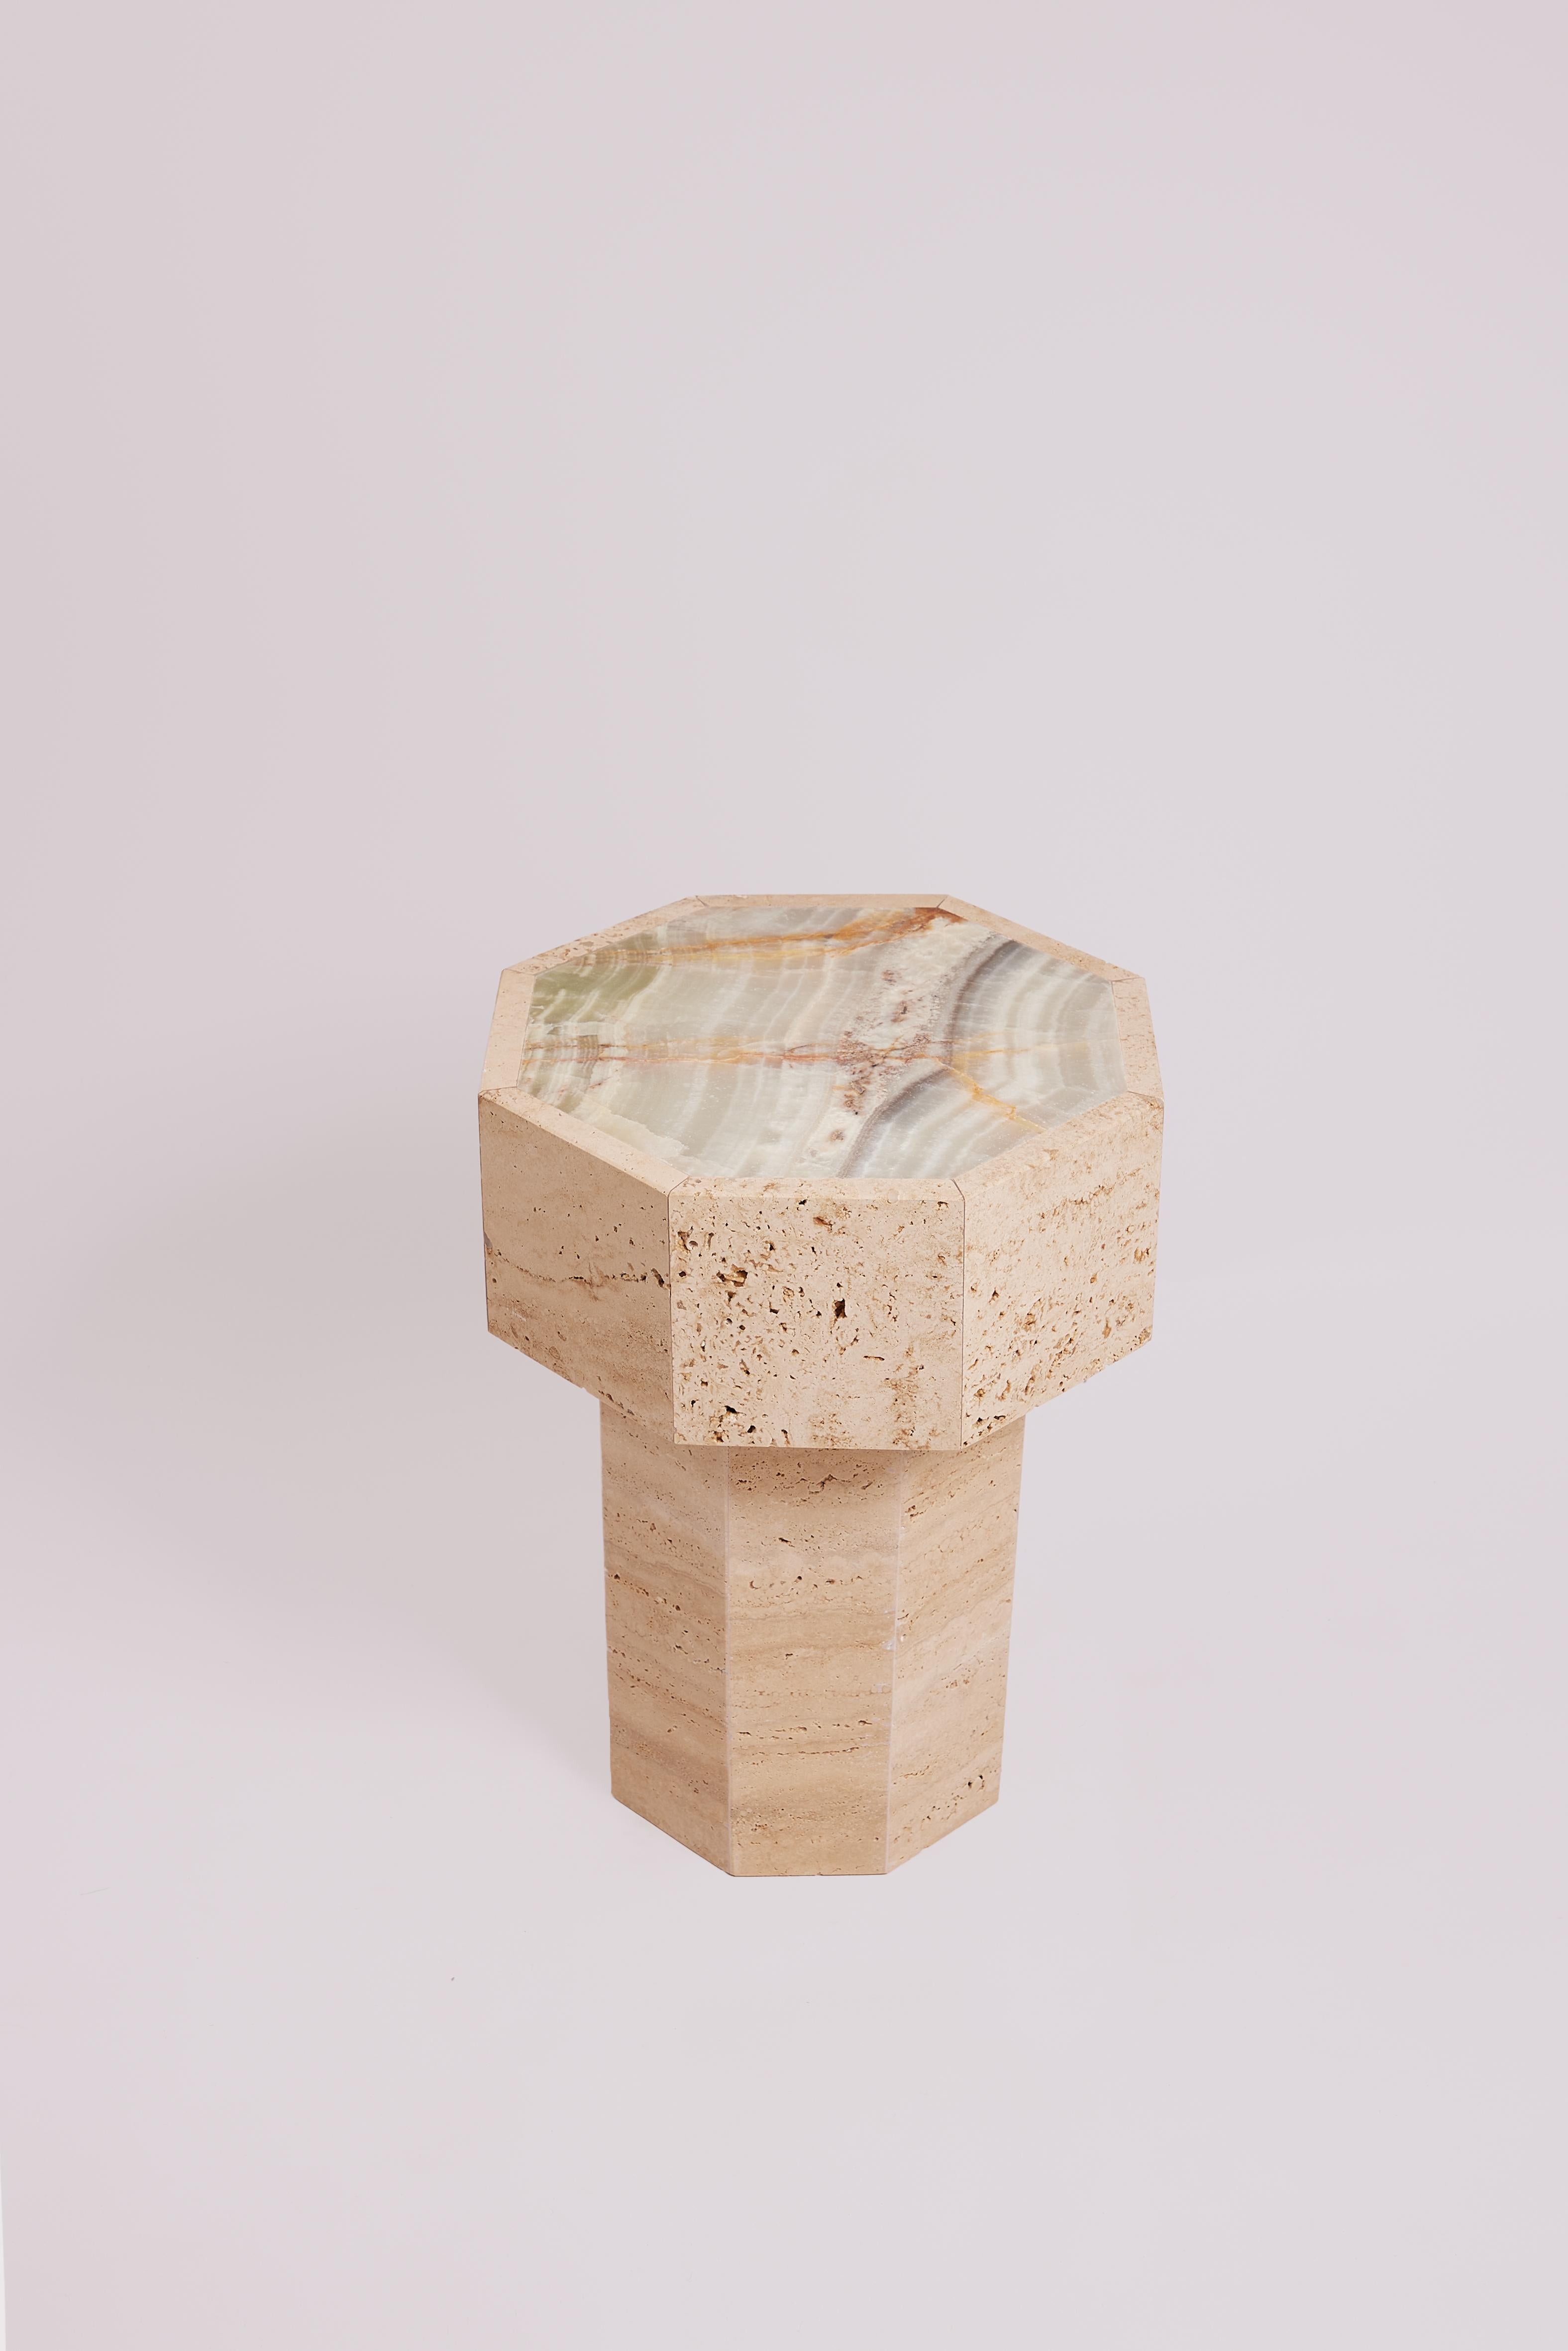 Exotic Onyx Gisele Side Table by Studio Gaia Paris
Dimensions: ⌀ 39 x H 50 cm
Materials: Exotic Onyx and Travertine

The Gisèle side table, in onyx and travertine, features two types of natural stones known for their unique beauty and durable